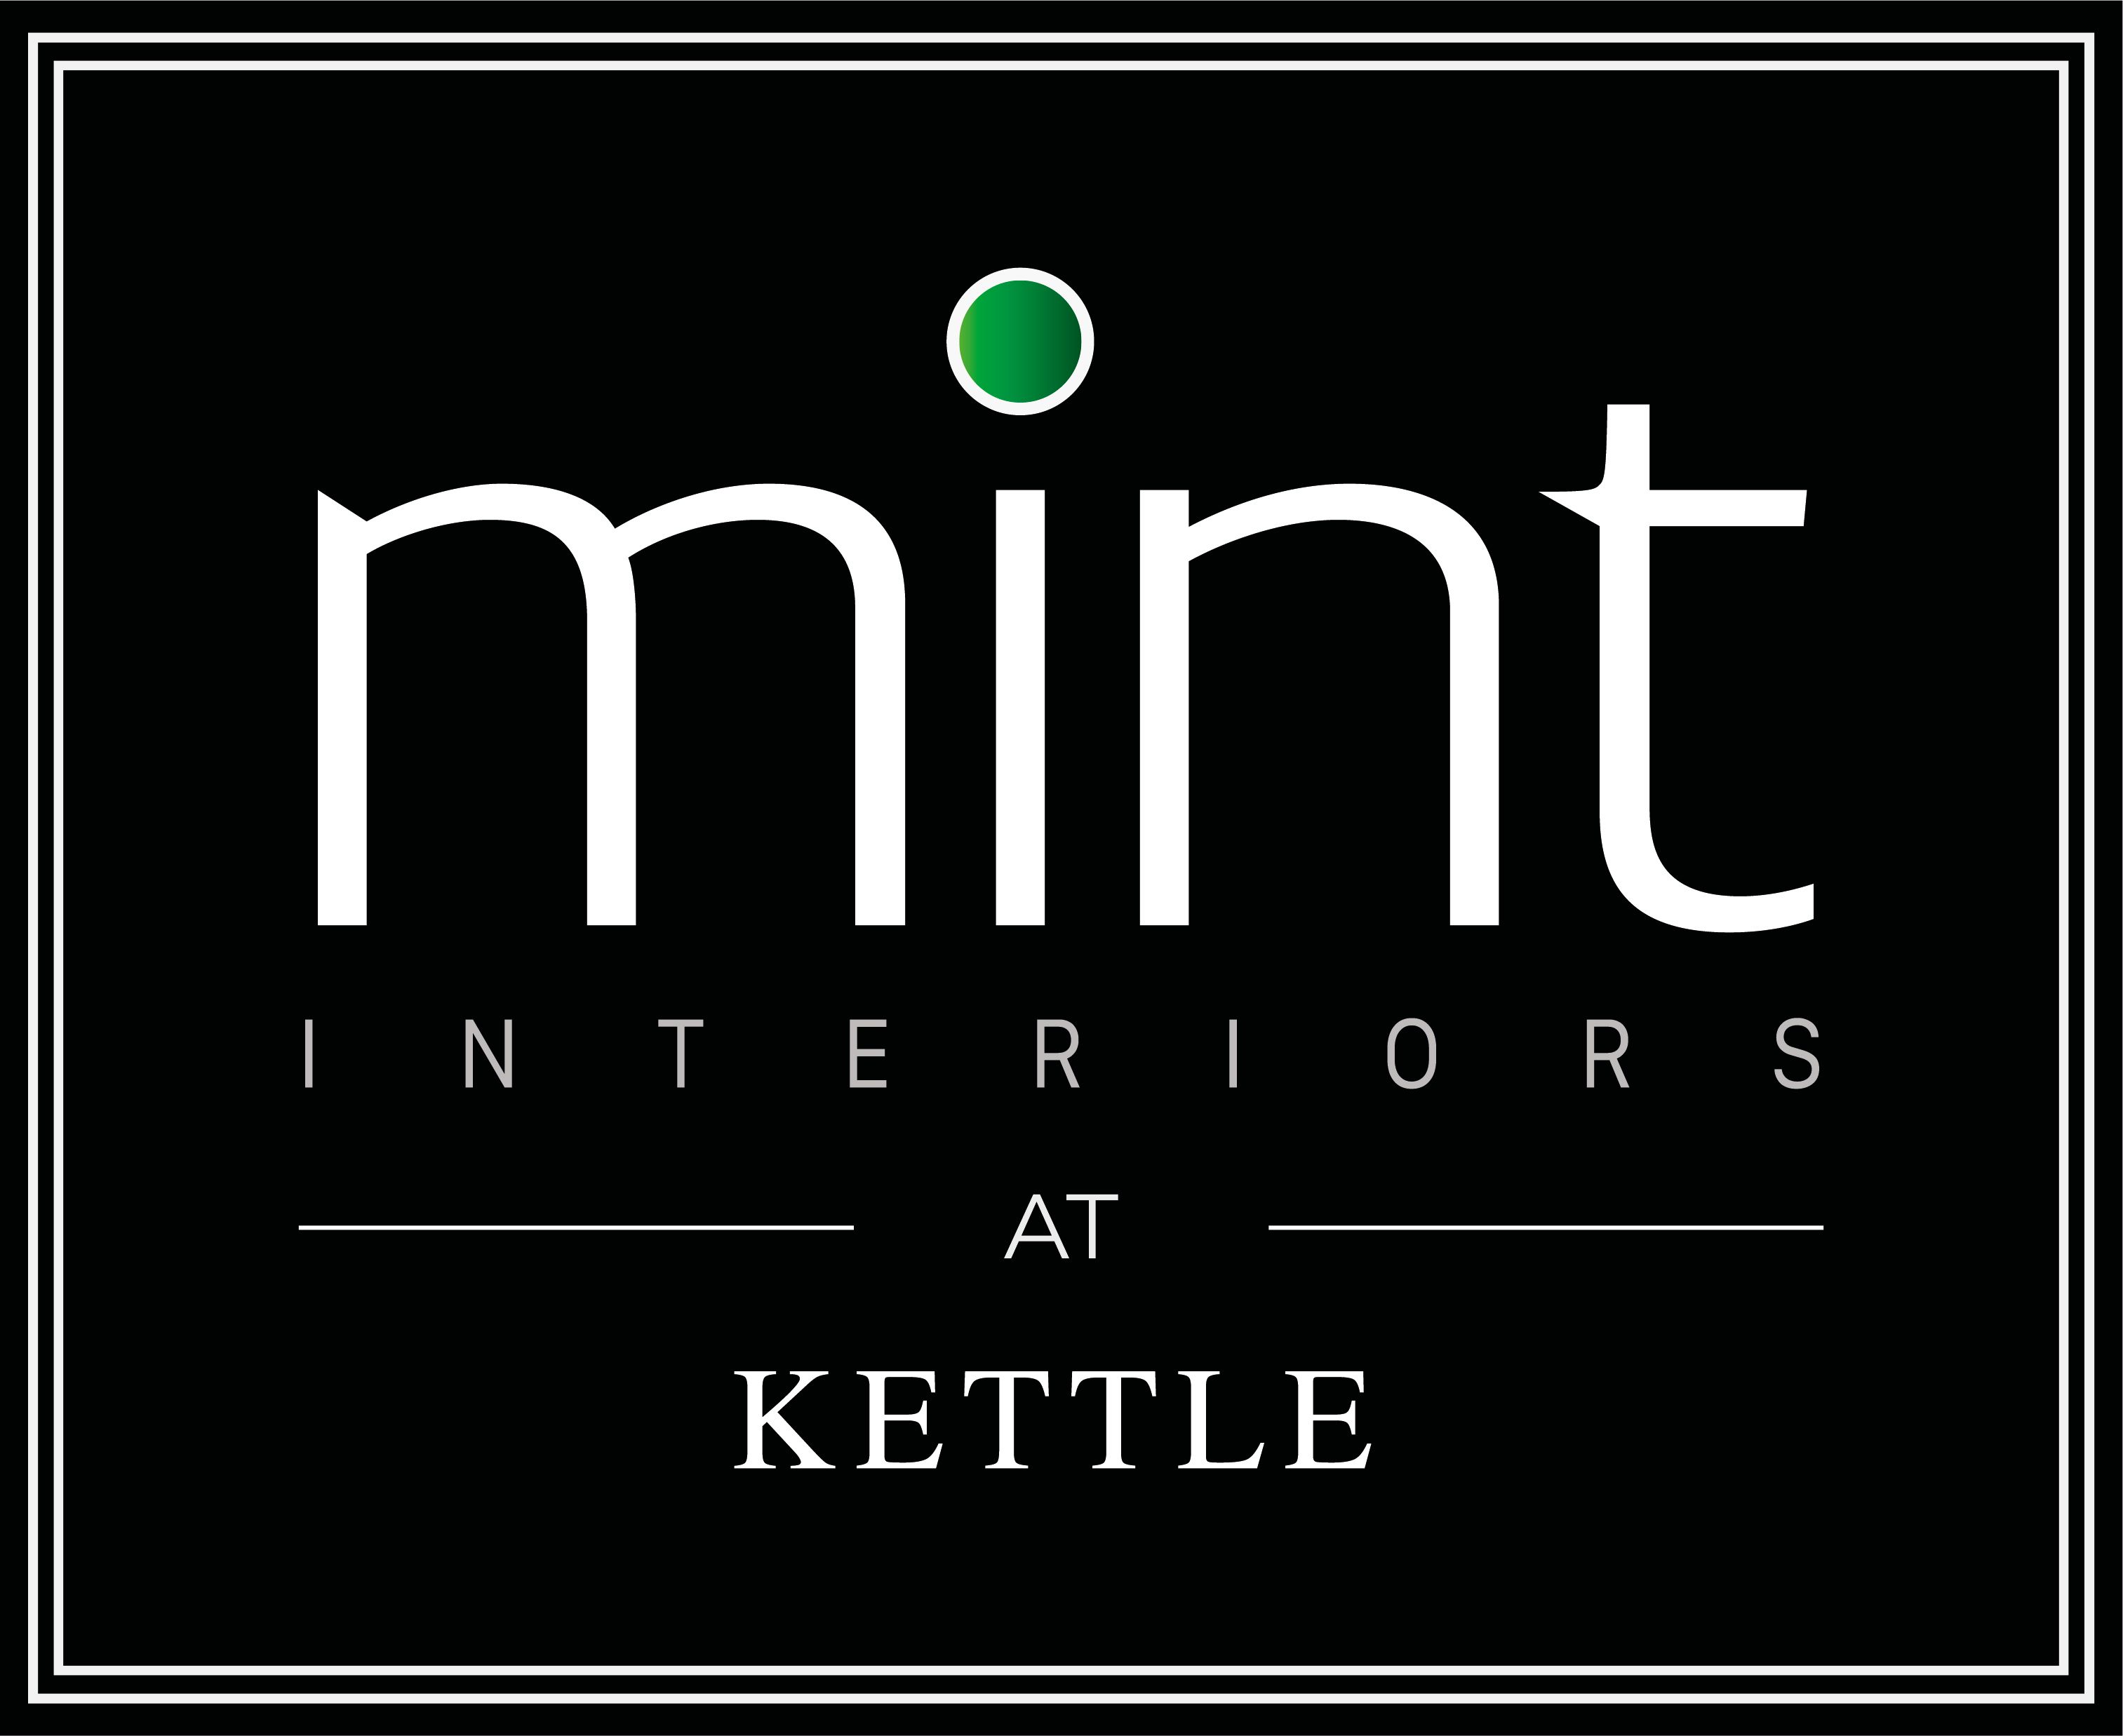 Kettle Interiors Agencies Limited